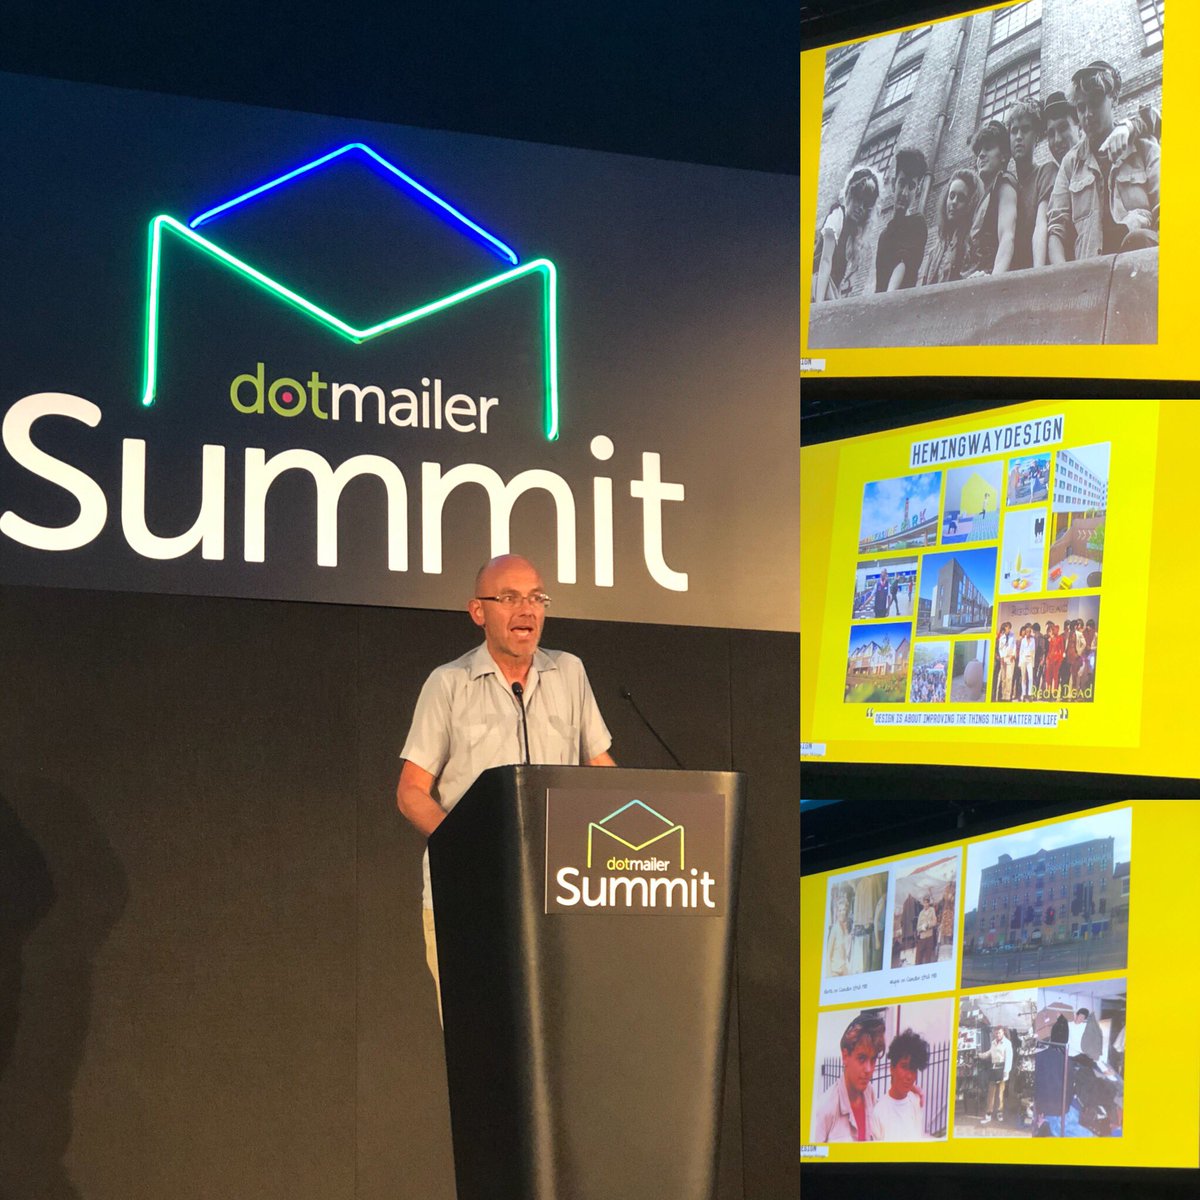 @HemingwayDesign founder #WayneHemingway on his journey to greatness... “life gives you chances and you have to grab them” #DotmailerSummit